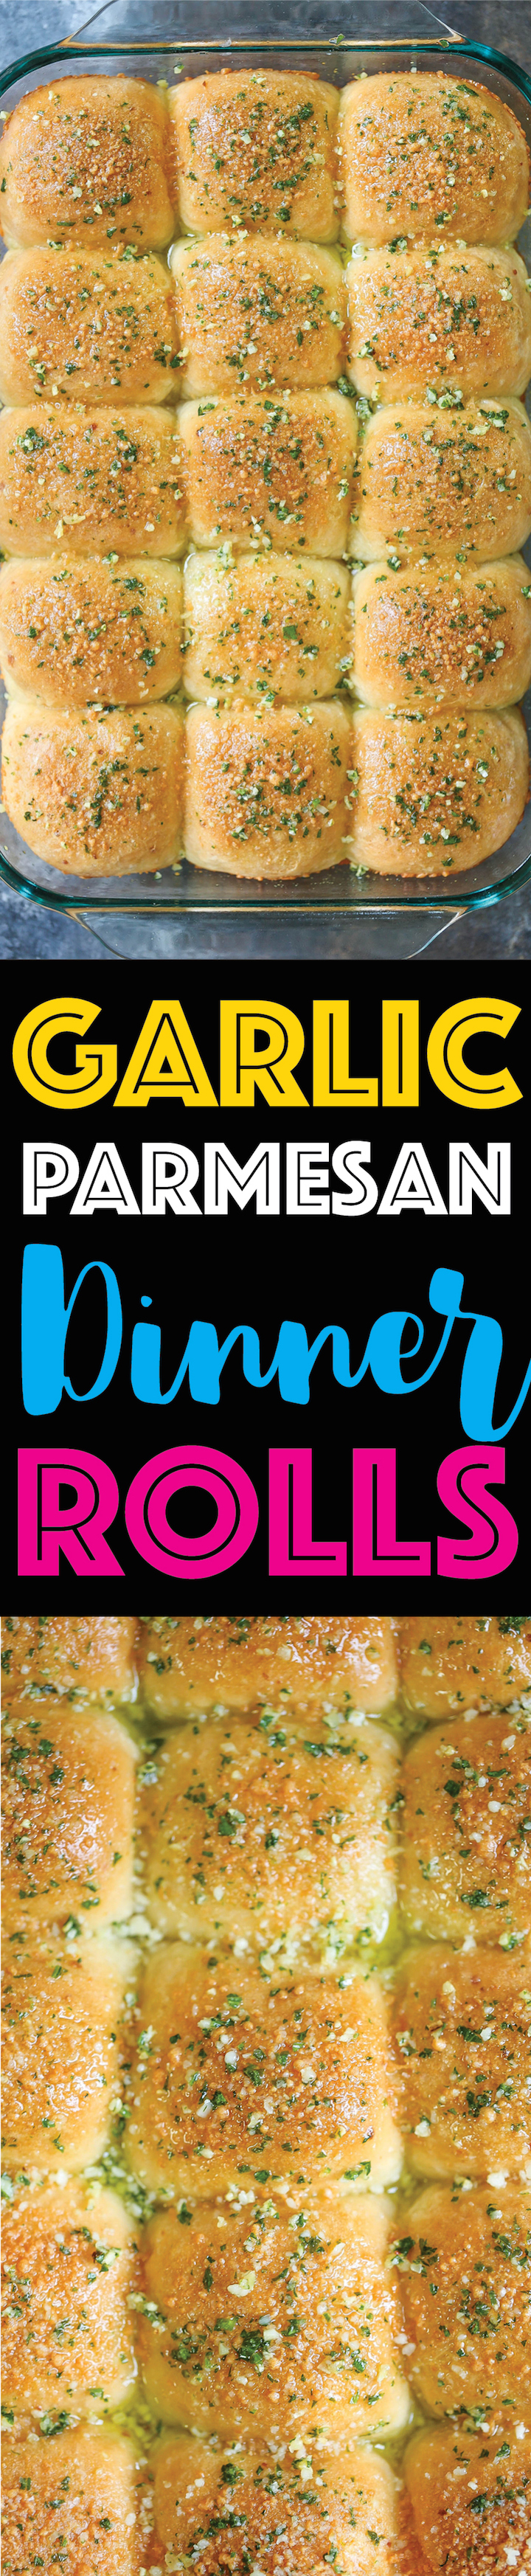 Garlic Parmesan Dinner Rolls - CLASSIC dinner rolls, except made even BETTER with garlic and grated Parmesan cheese! Soft, tender, warm, and buttery!!!